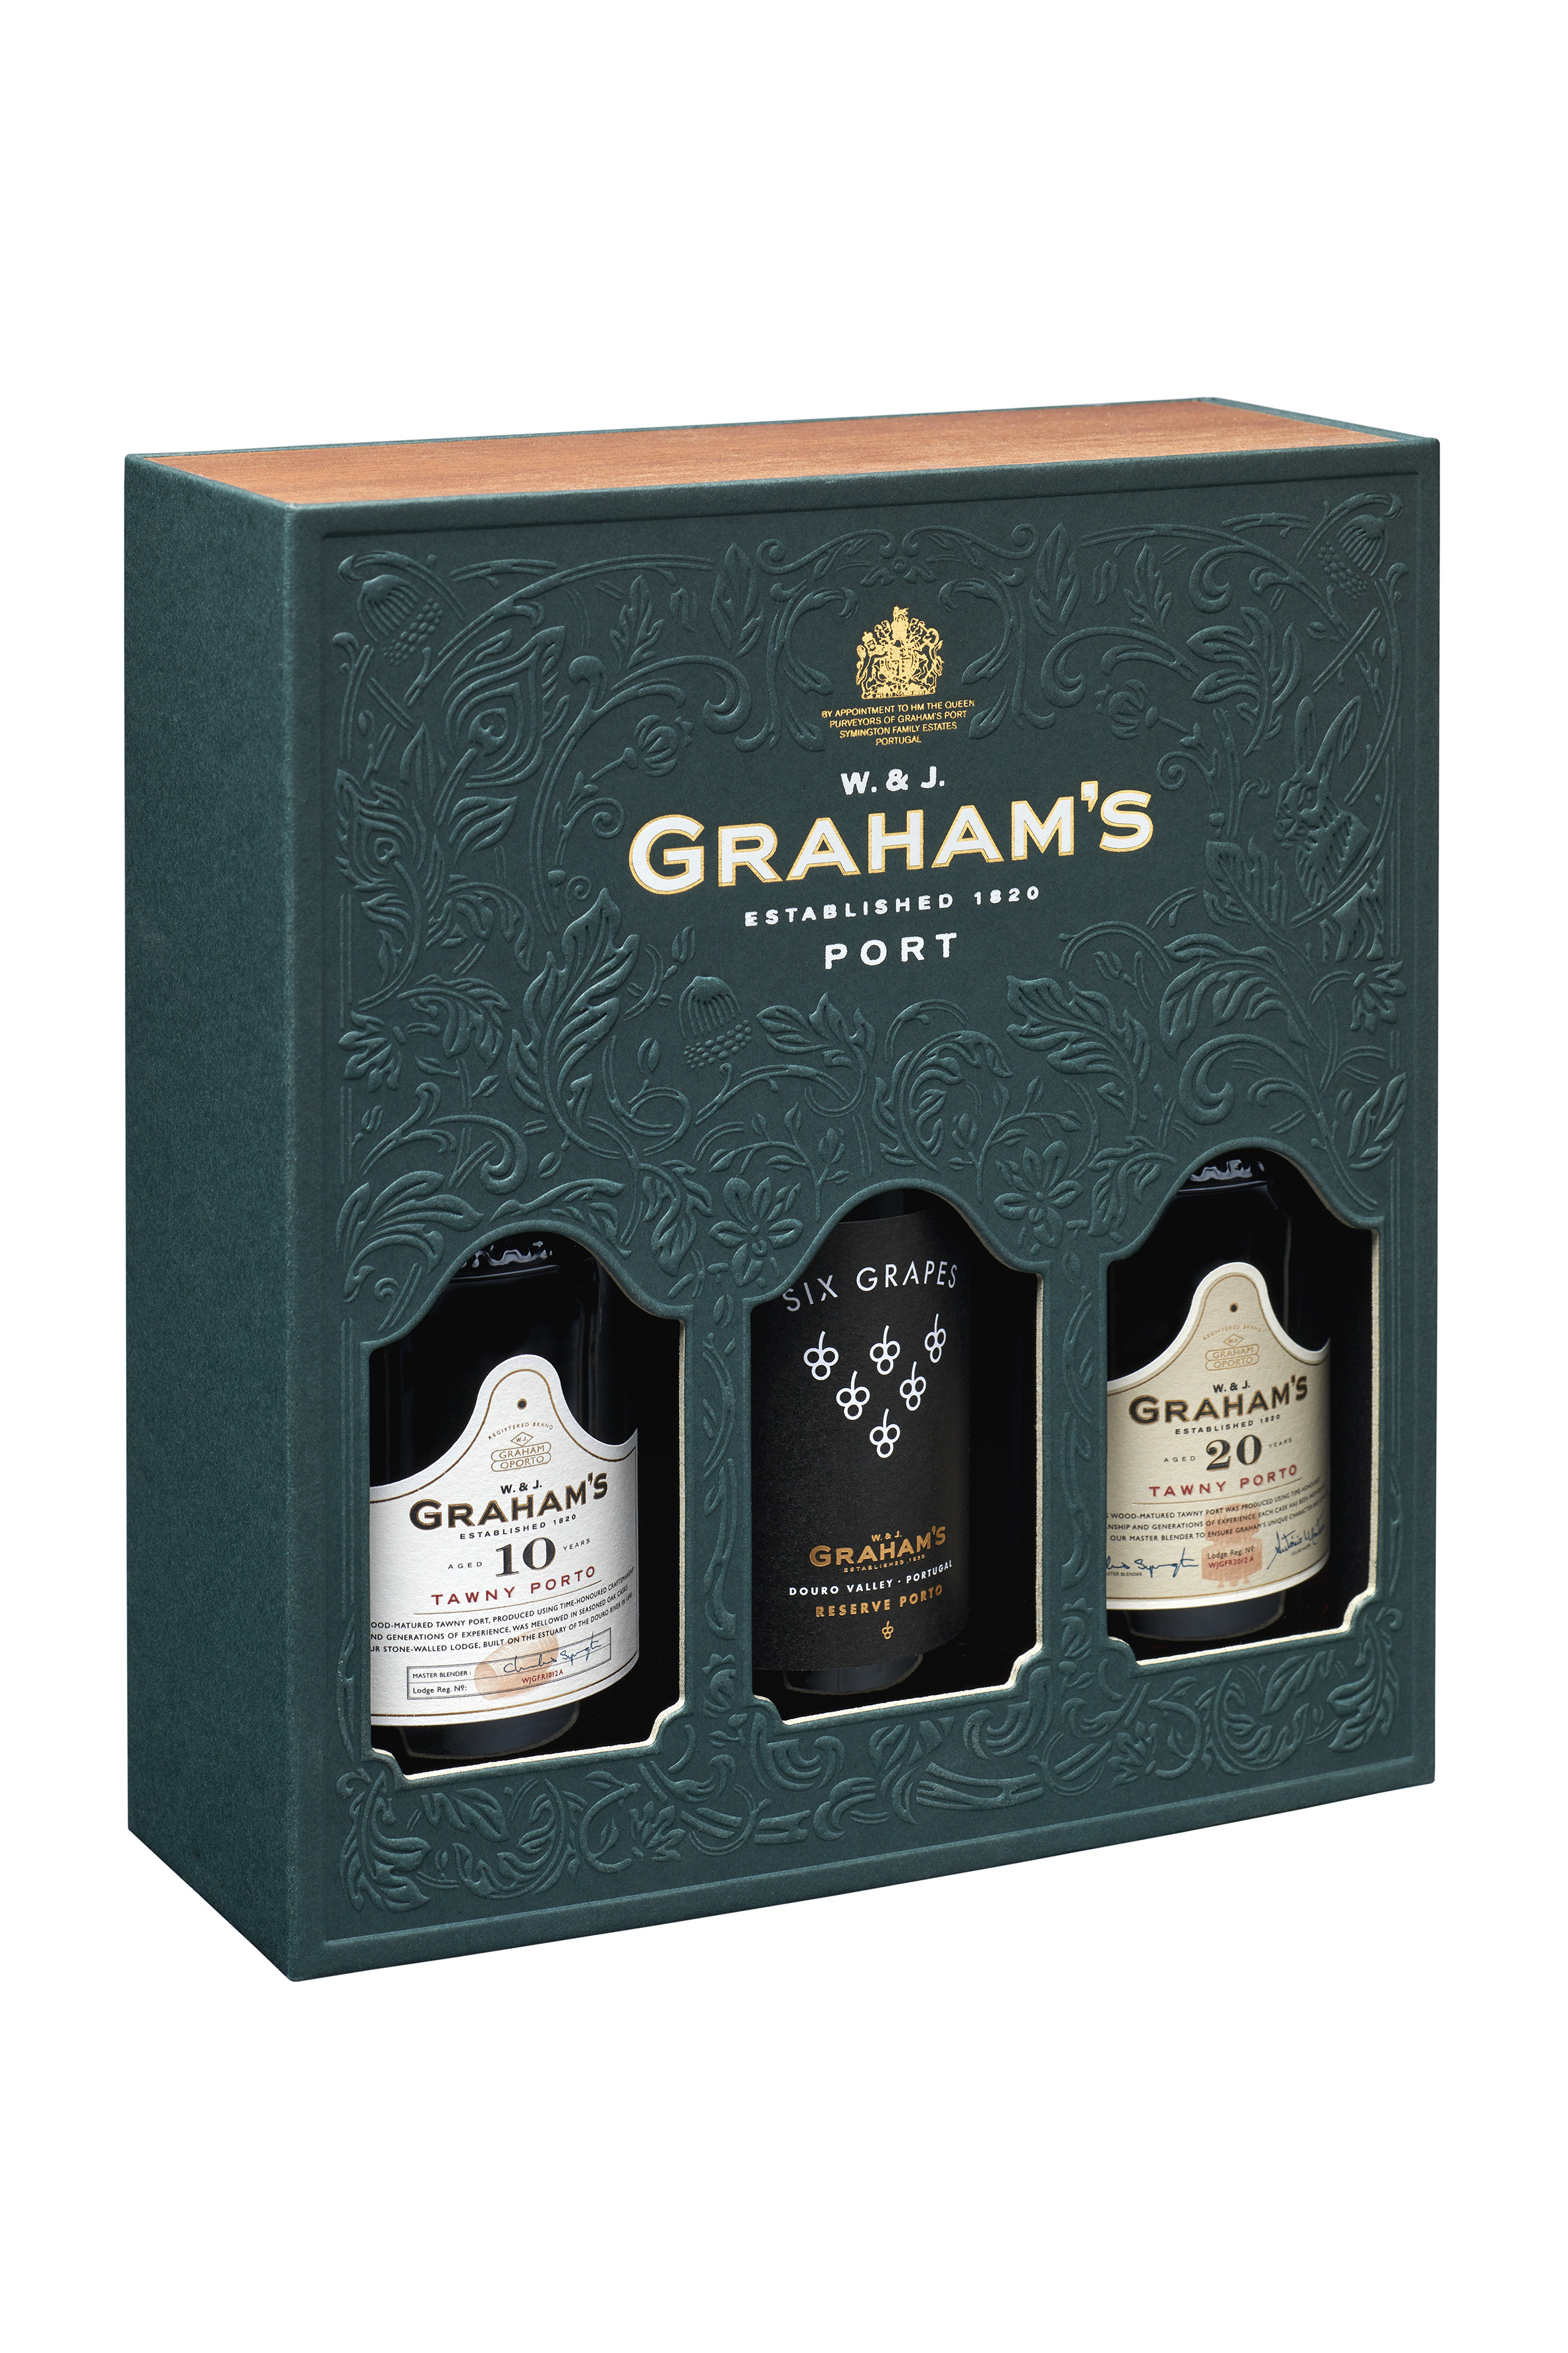 Product Image for GRAHAM'S TRIO PACK (SG/10/20) 3x200mL